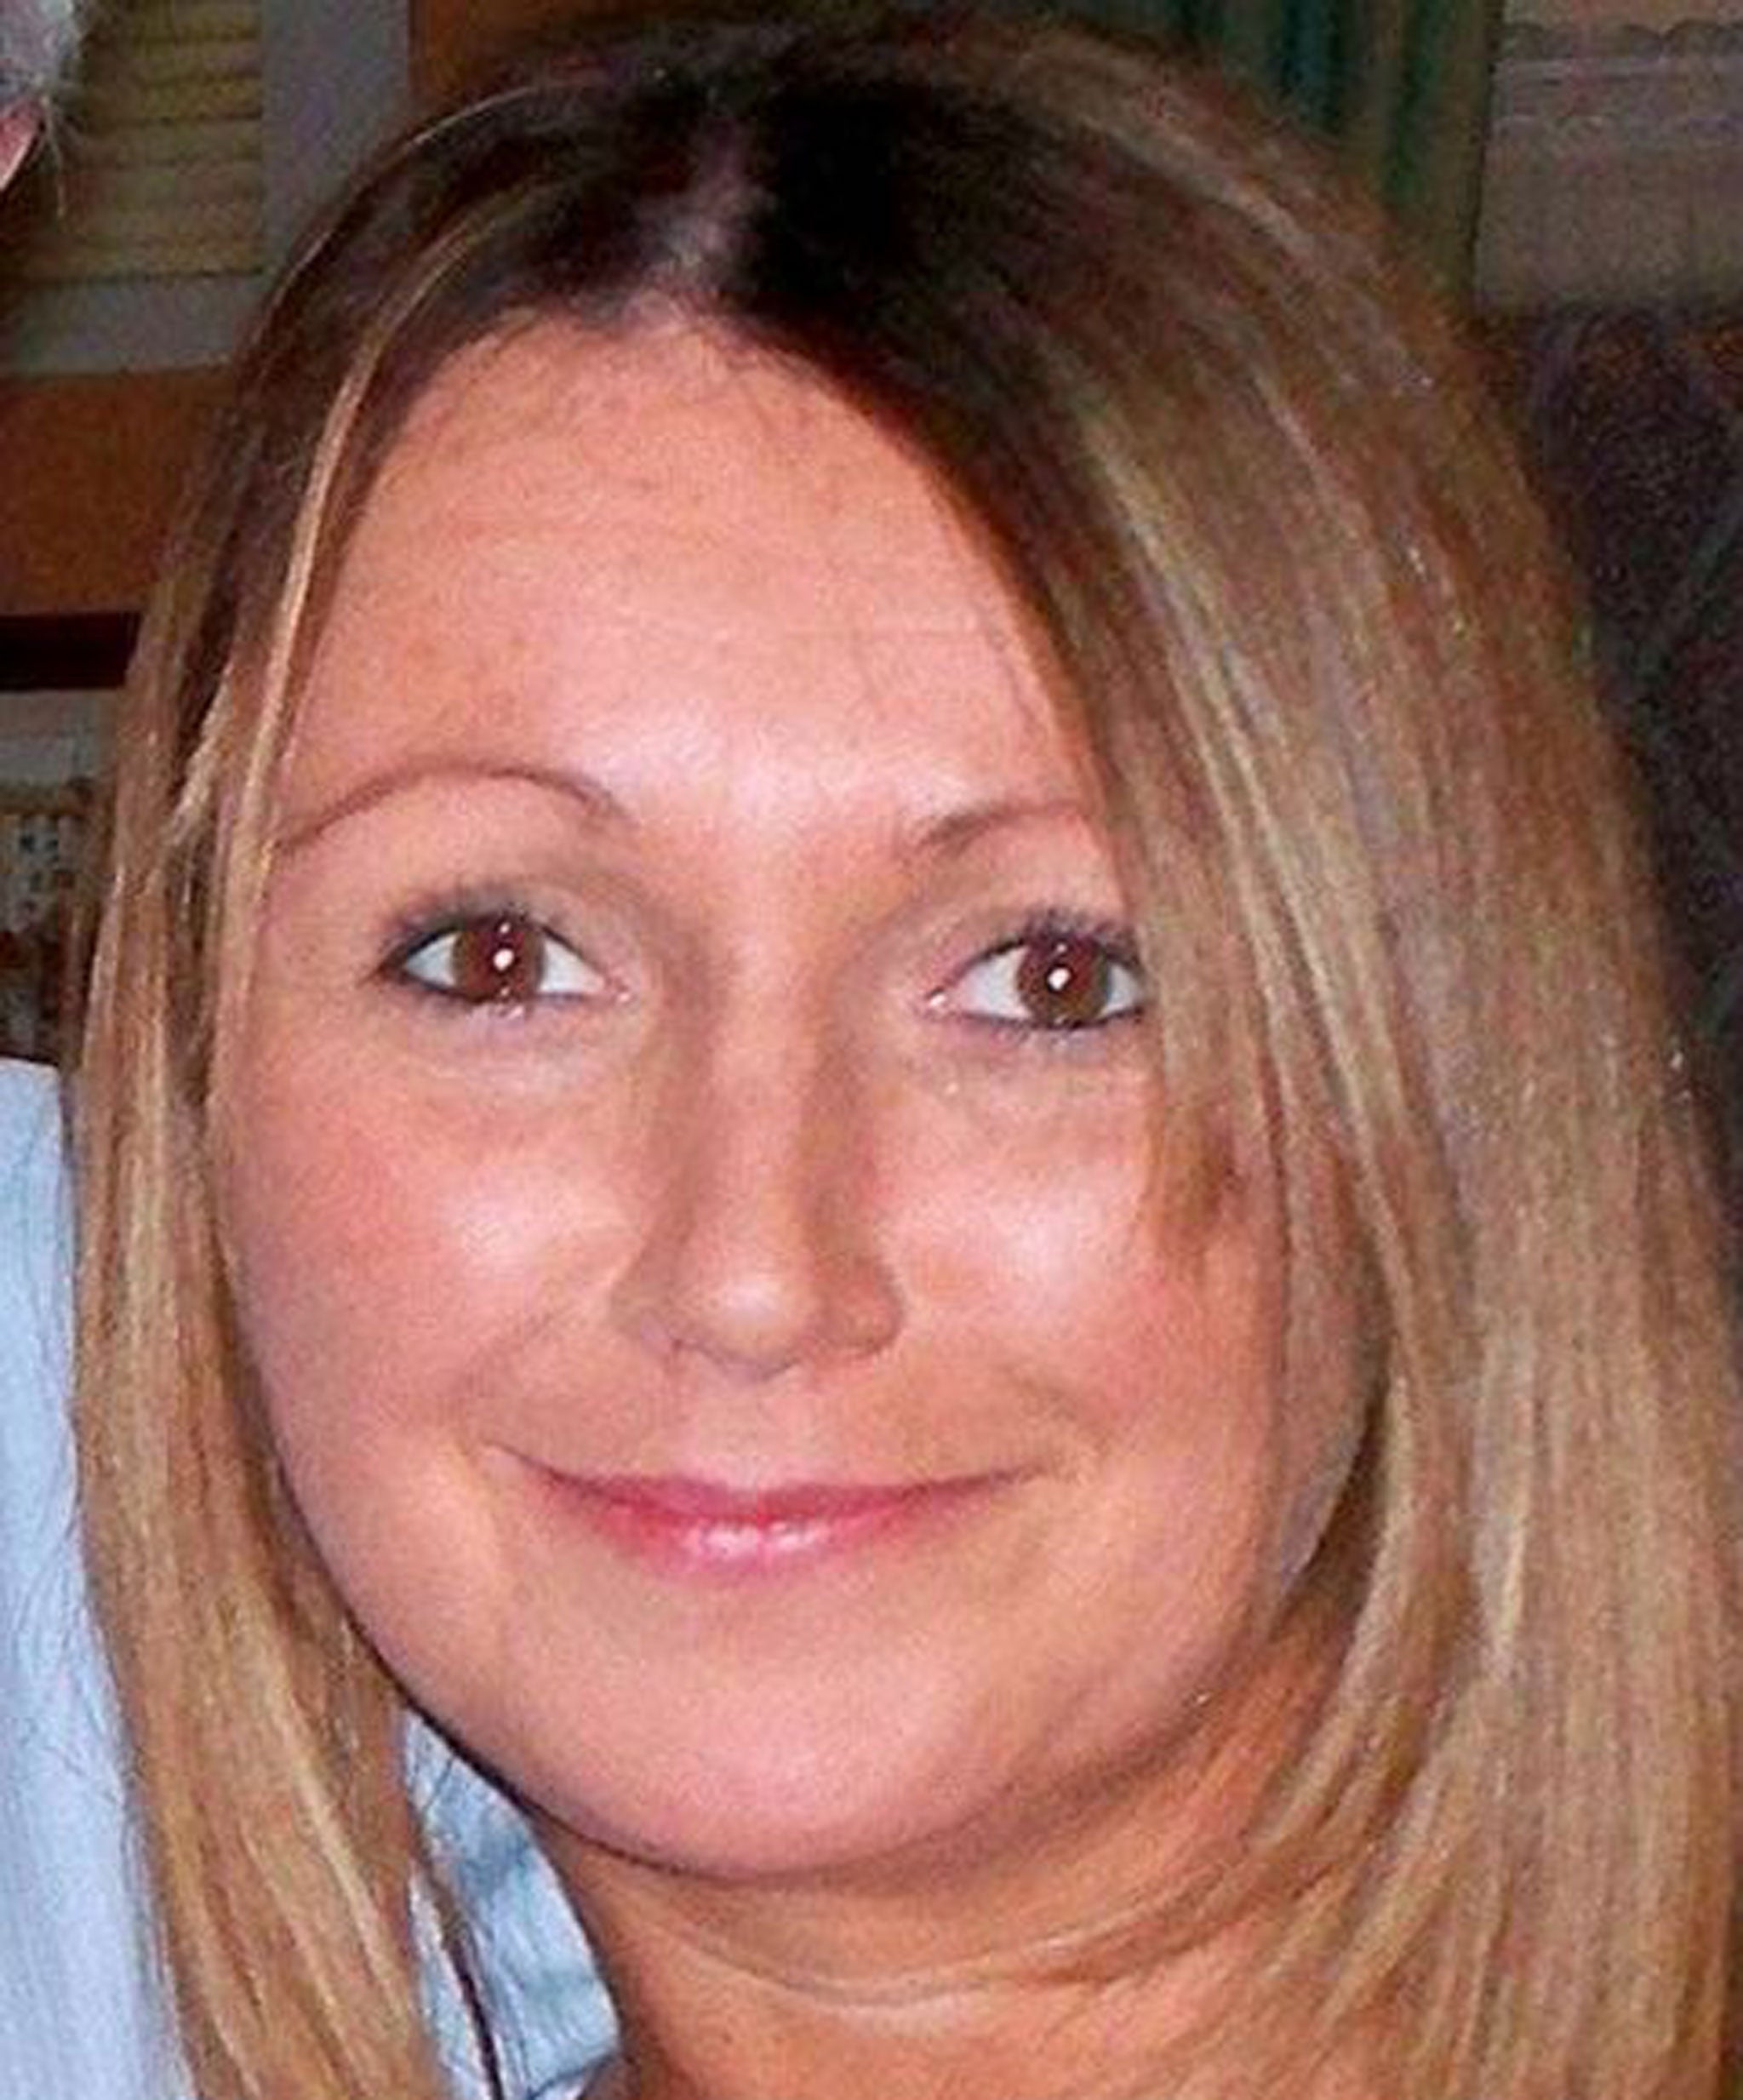 Claudia Lawrence has been missing since 2009